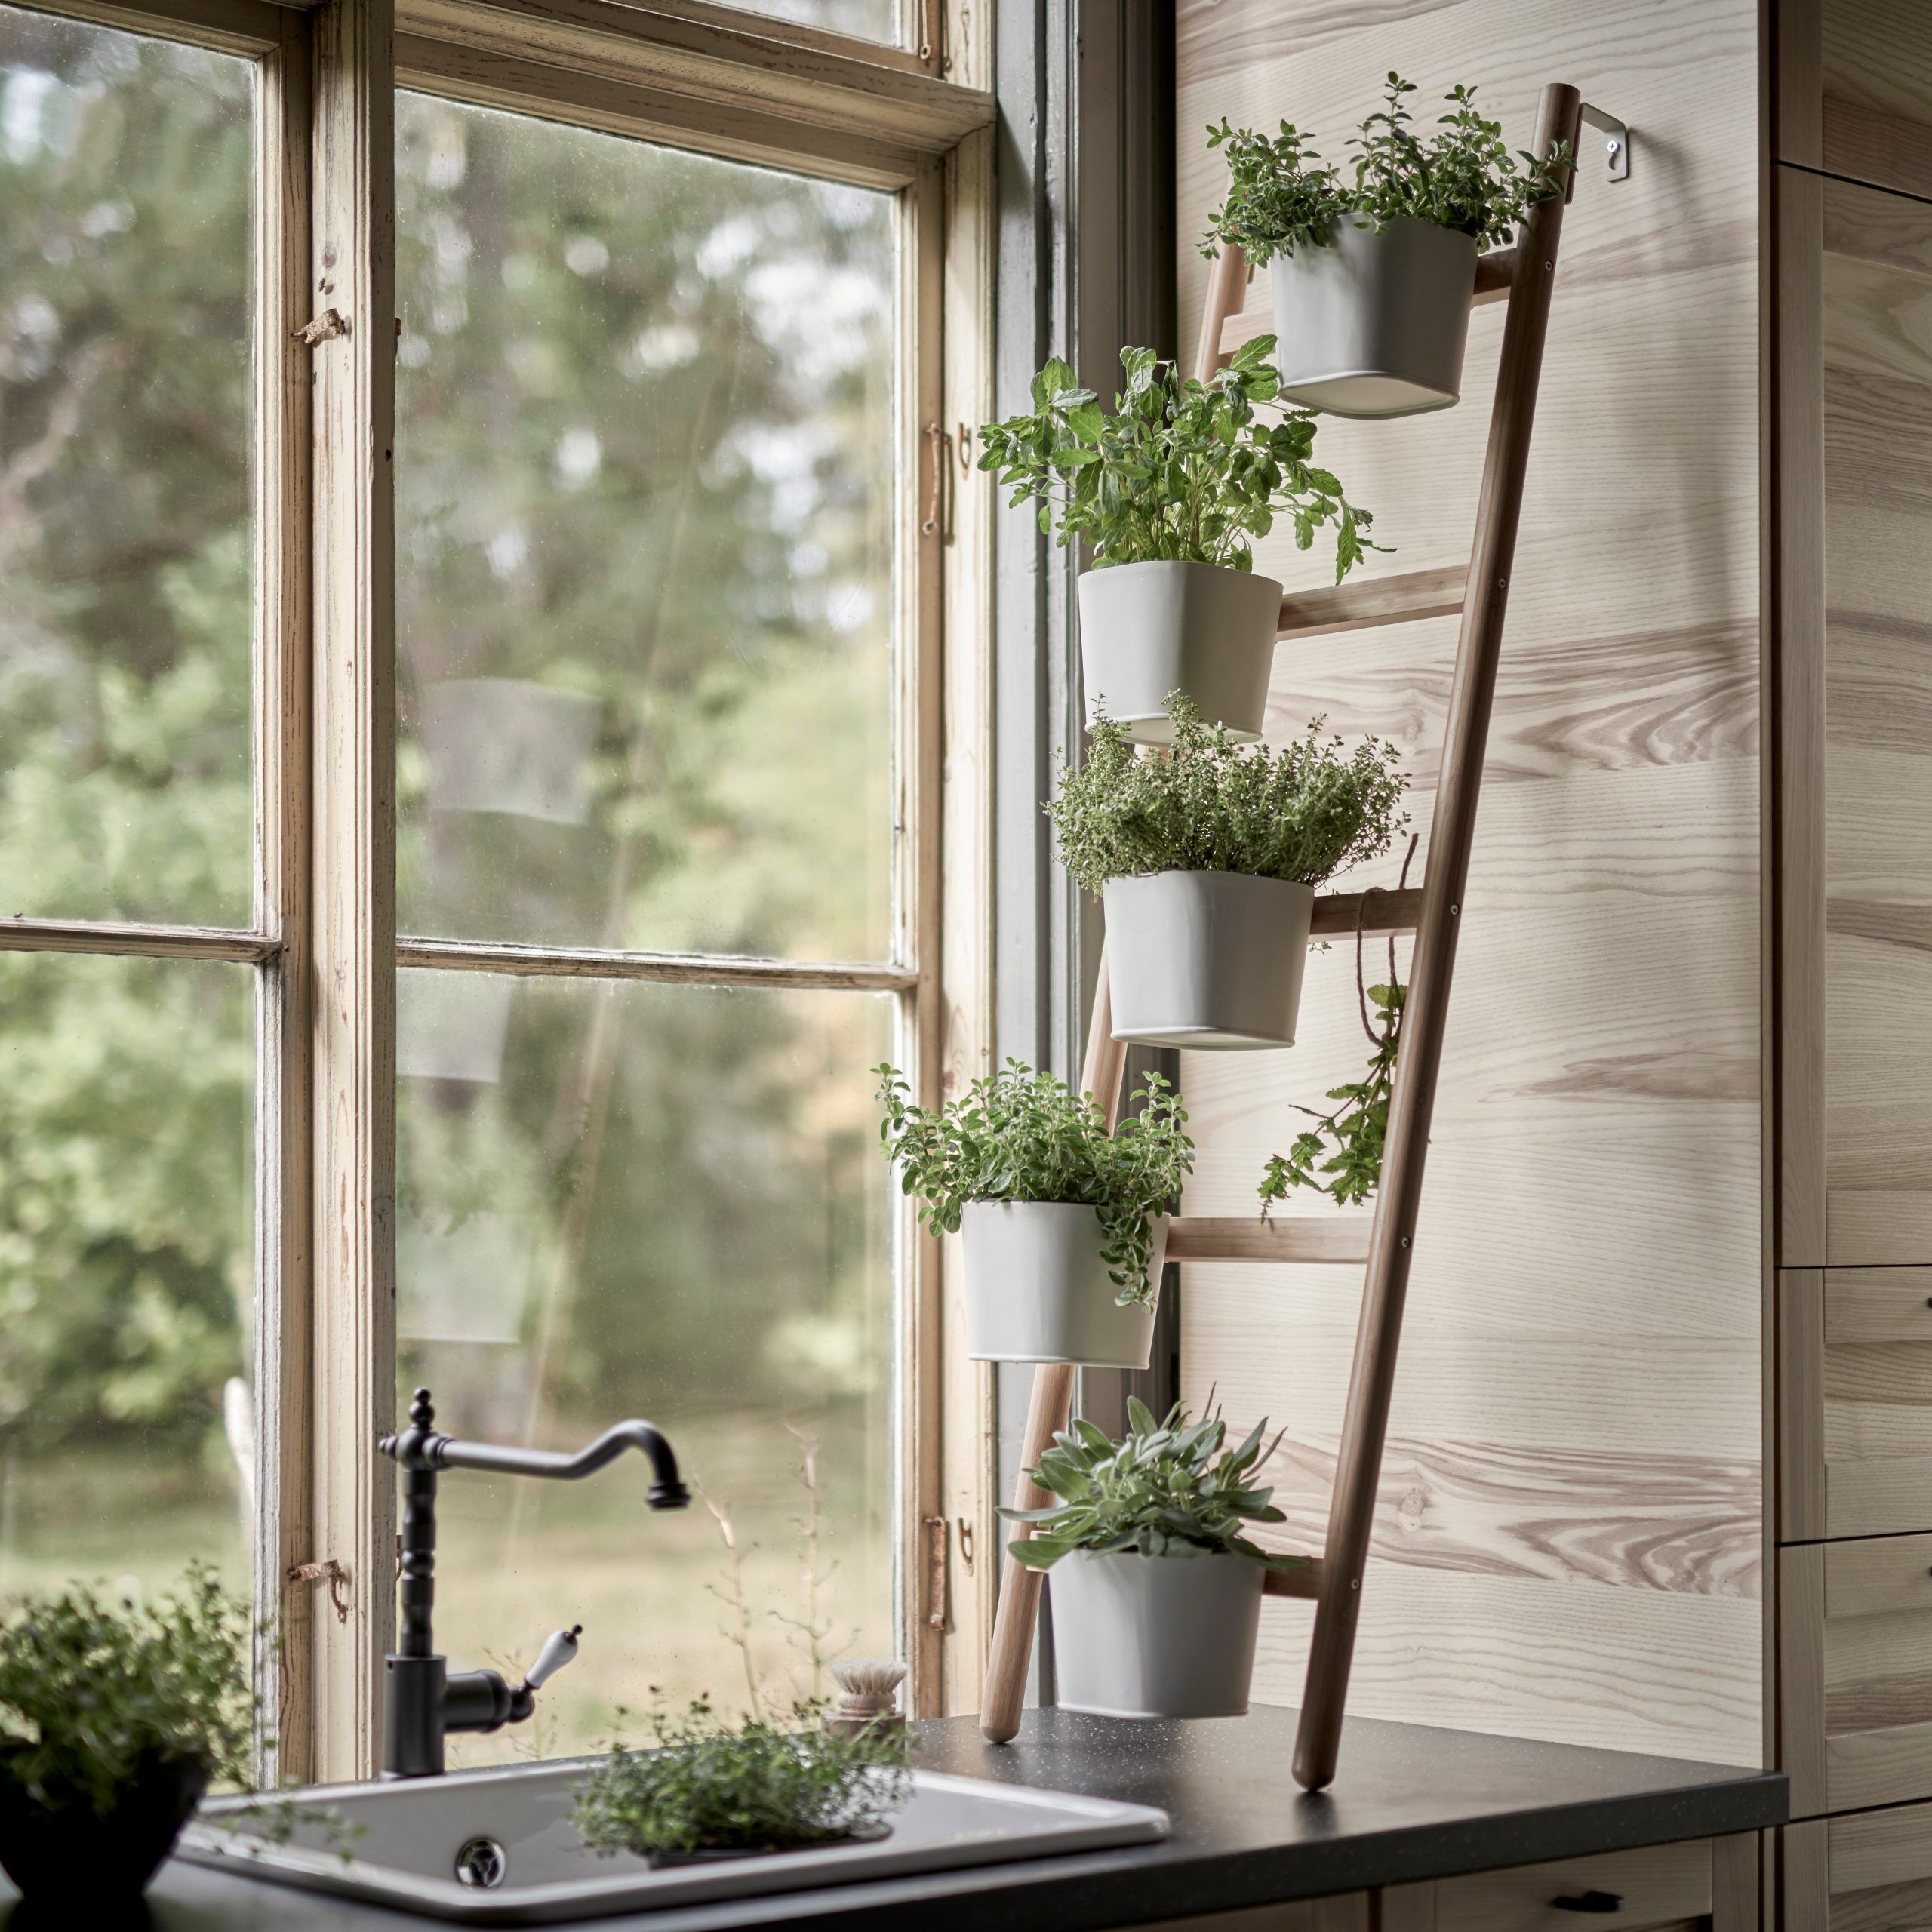 Create An Indoor Herb Garden: Tips To Grow Your Herbs | Architectural Digest For Inner Garden Wall Art (View 9 of 15)